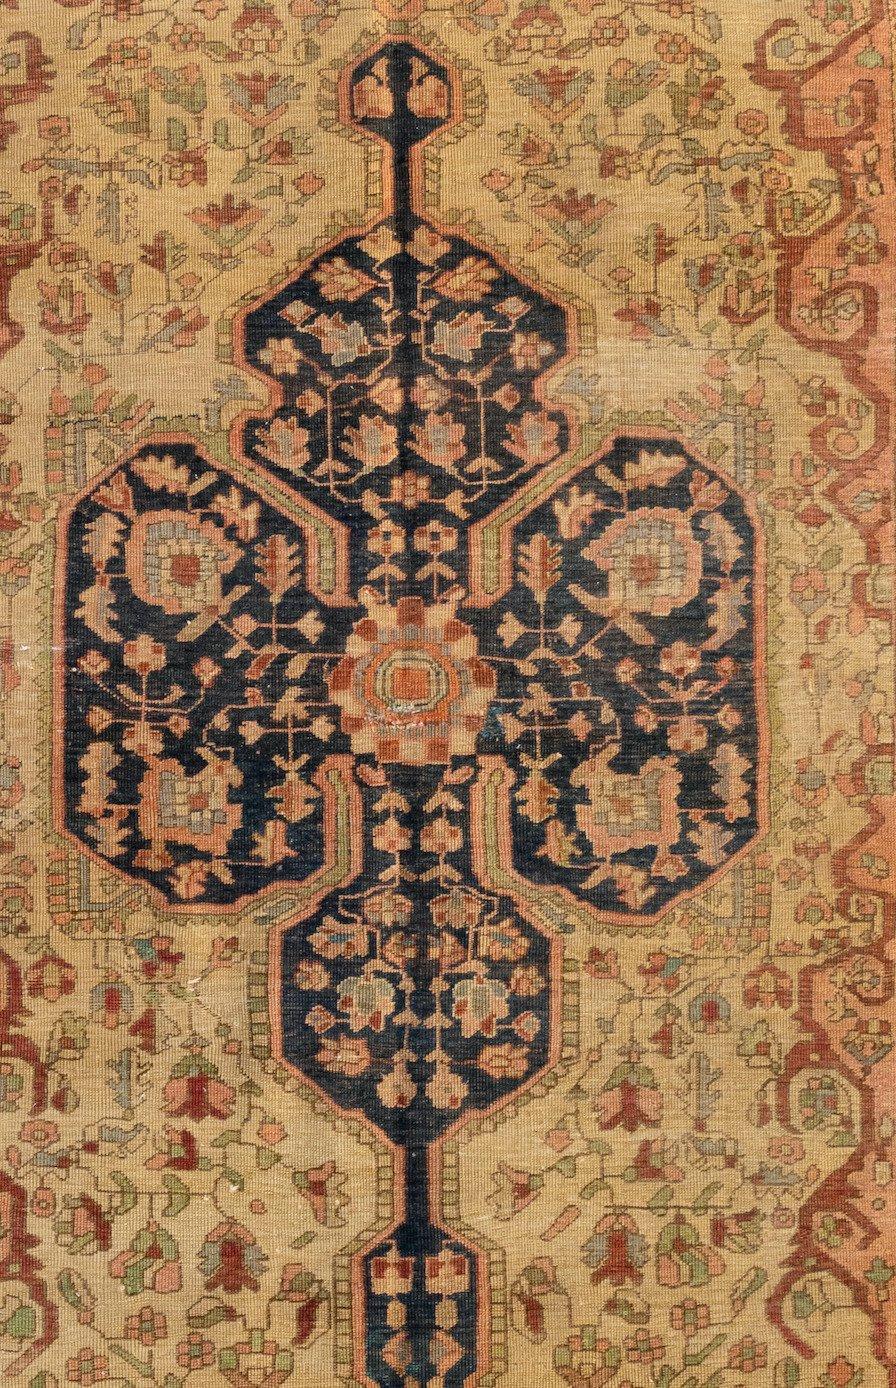 This is a fine example of a lovely antique Farahan Sarouk dating from the 1880s-1900s measuring 4.1 x 6.7 ft.

Please note there are two very small worn areas on the medallion. The rug is in otherwise excellent condition. Kindly reference the third